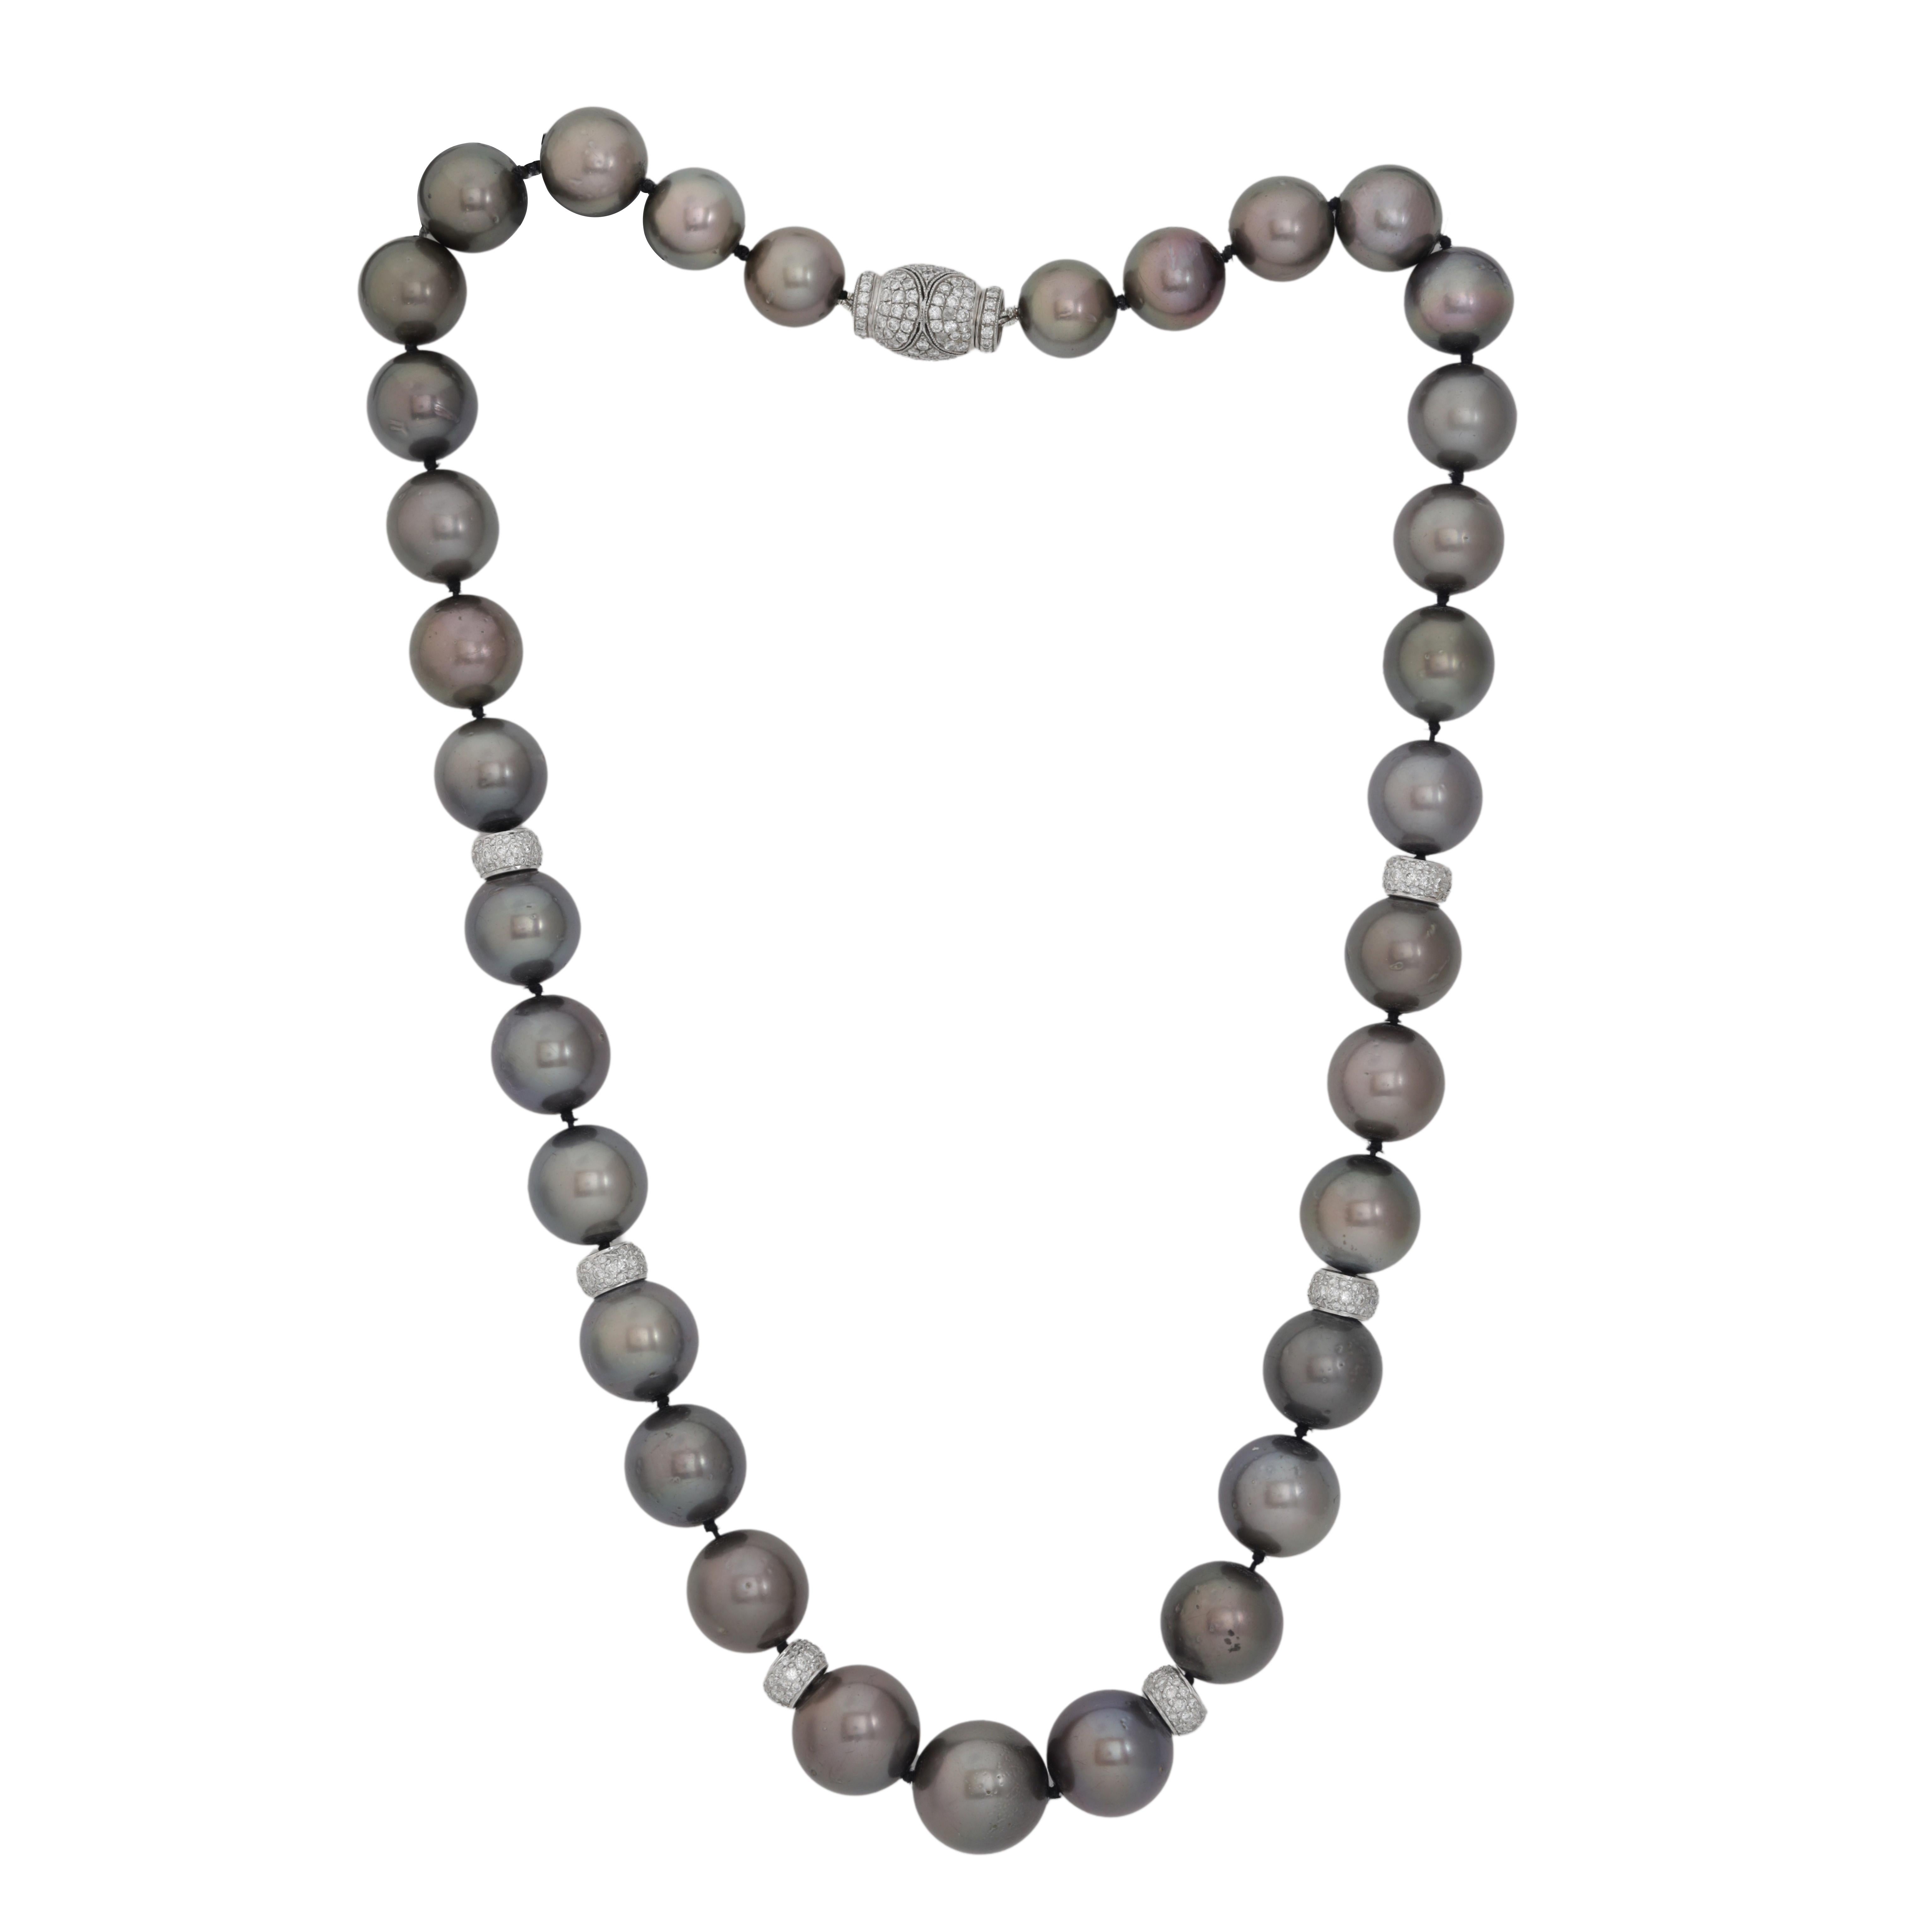 Diamond and pearl necklace adorned with 11-14 mm Tahitian south sea pearls and rondels containing 1.90 cts tw of micropave round diamonds
Diana M. is a leading supplier of top-quality fine jewelry for over 35 years.
Diana M is one-stop shop for all